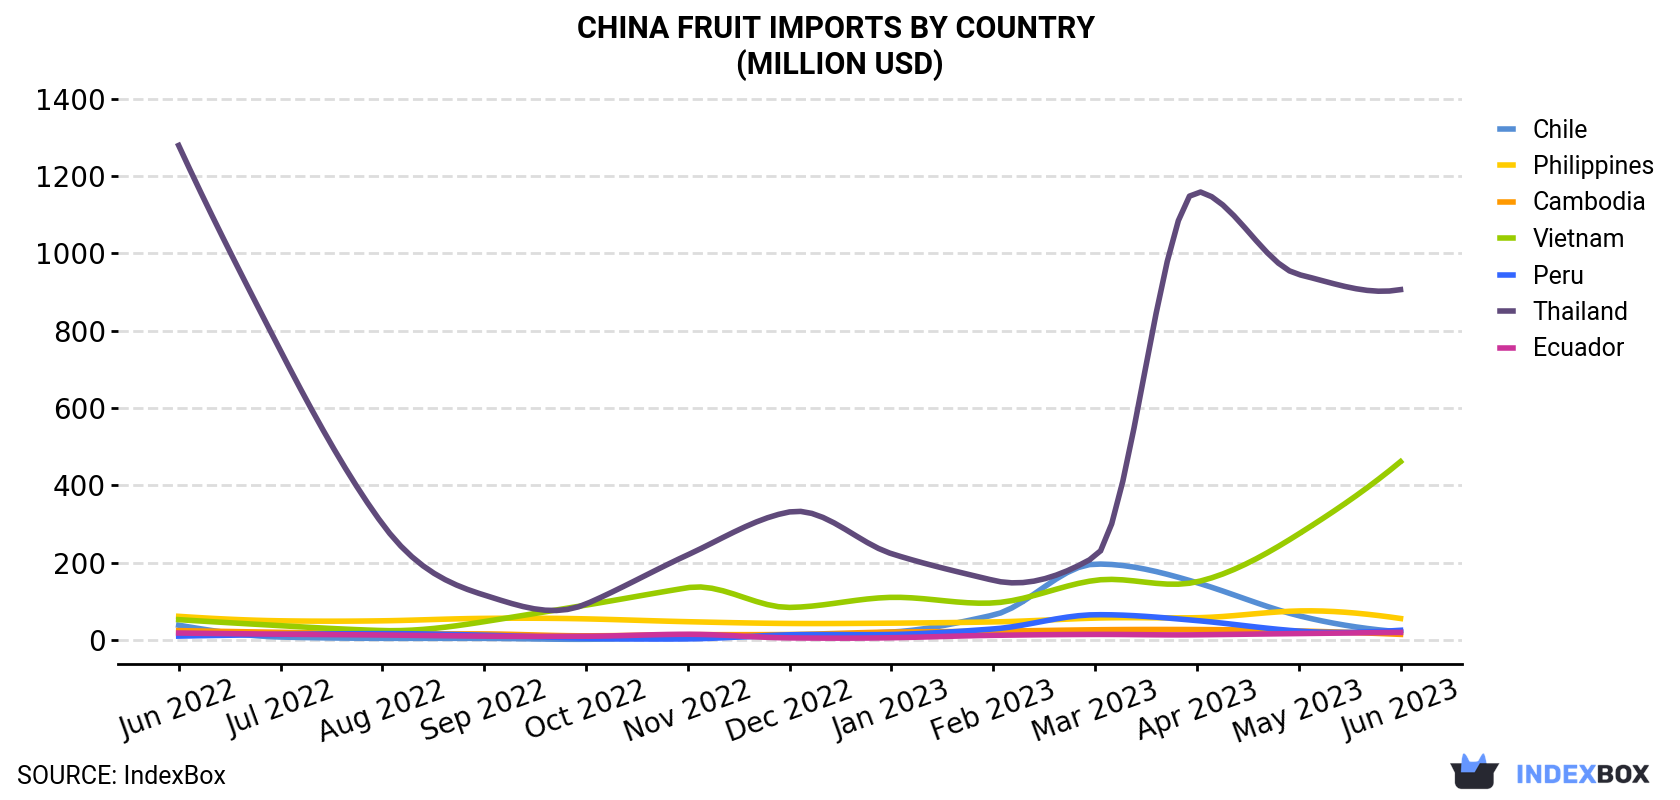 China Fruit Imports By Country (Million USD)